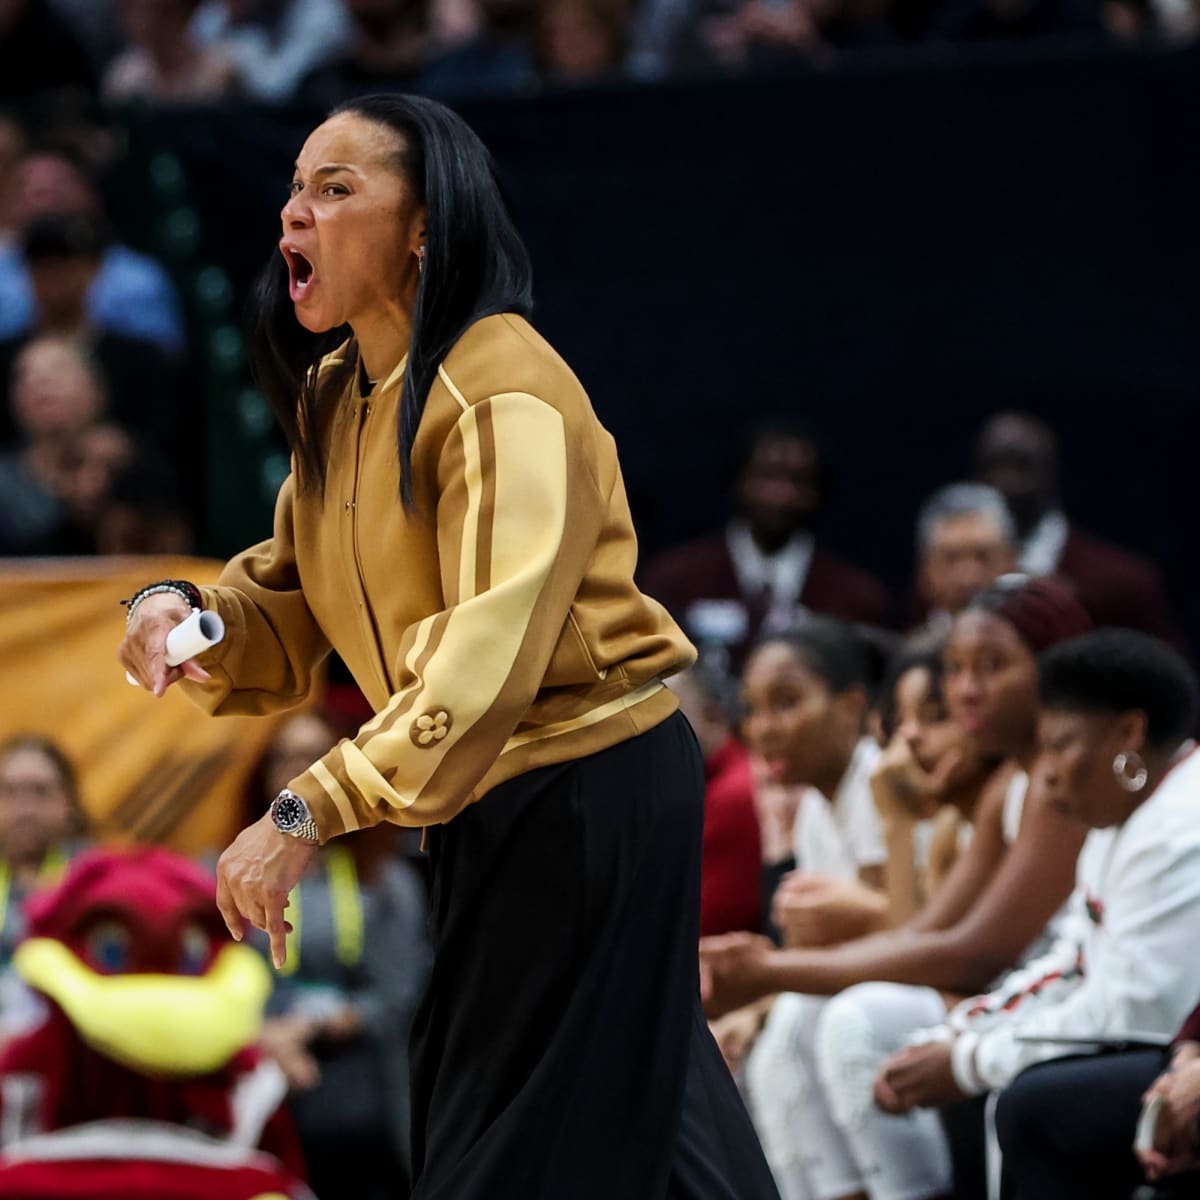 Women's basketball coaches deal with reality of no NCAAs - The Sumter Item